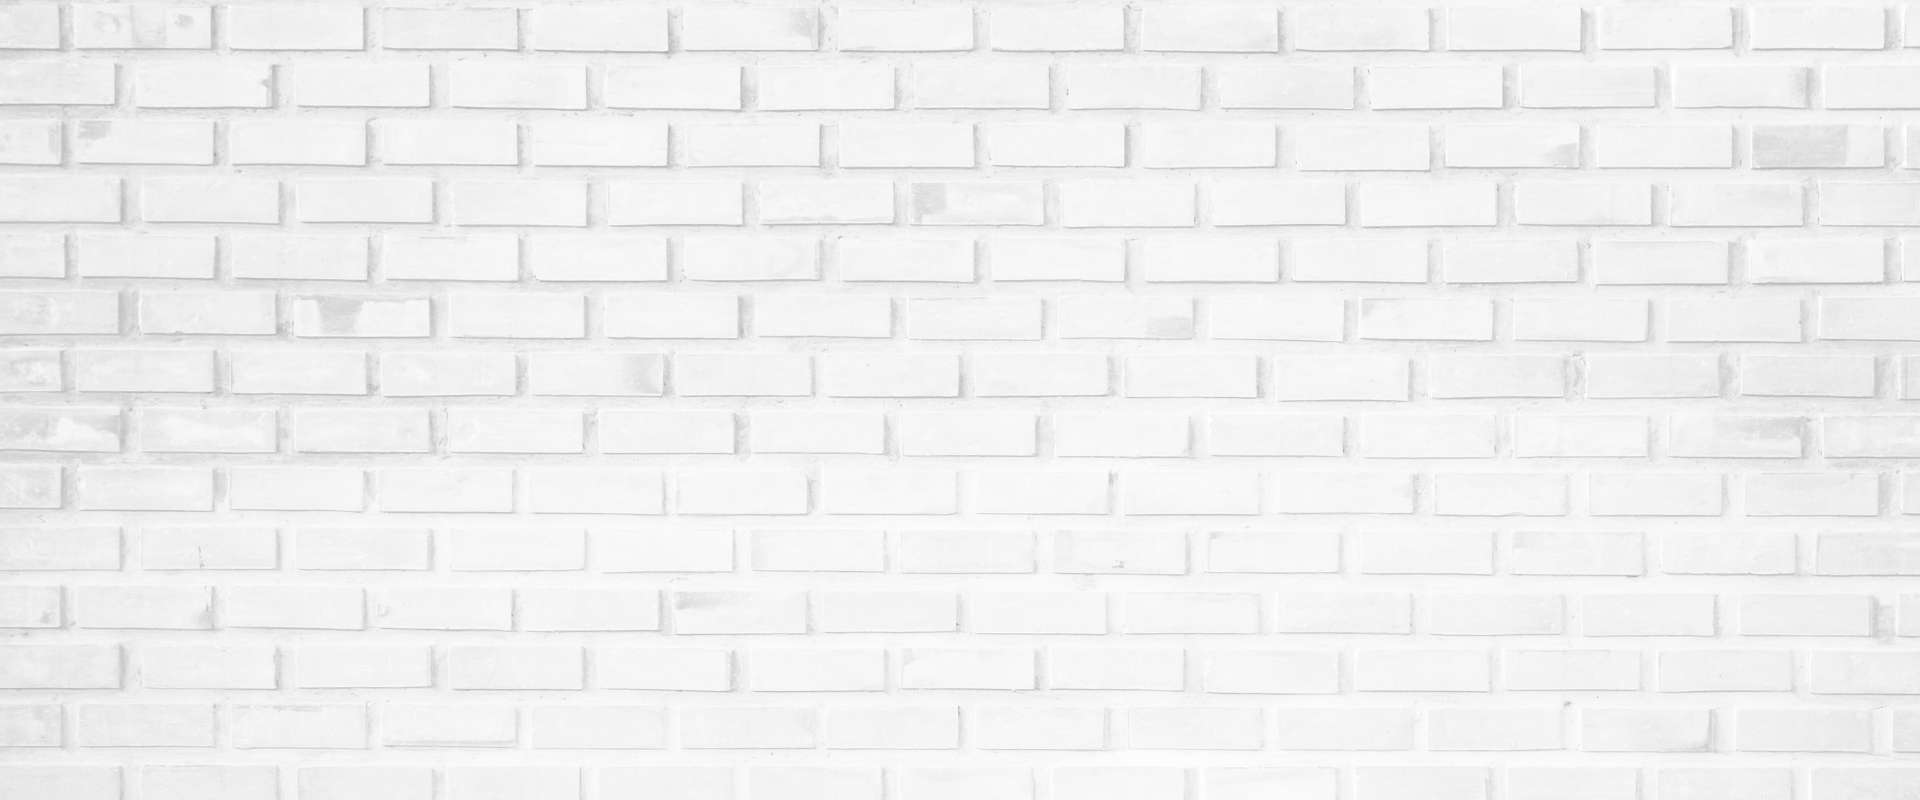 Wall white brick wall texture background.